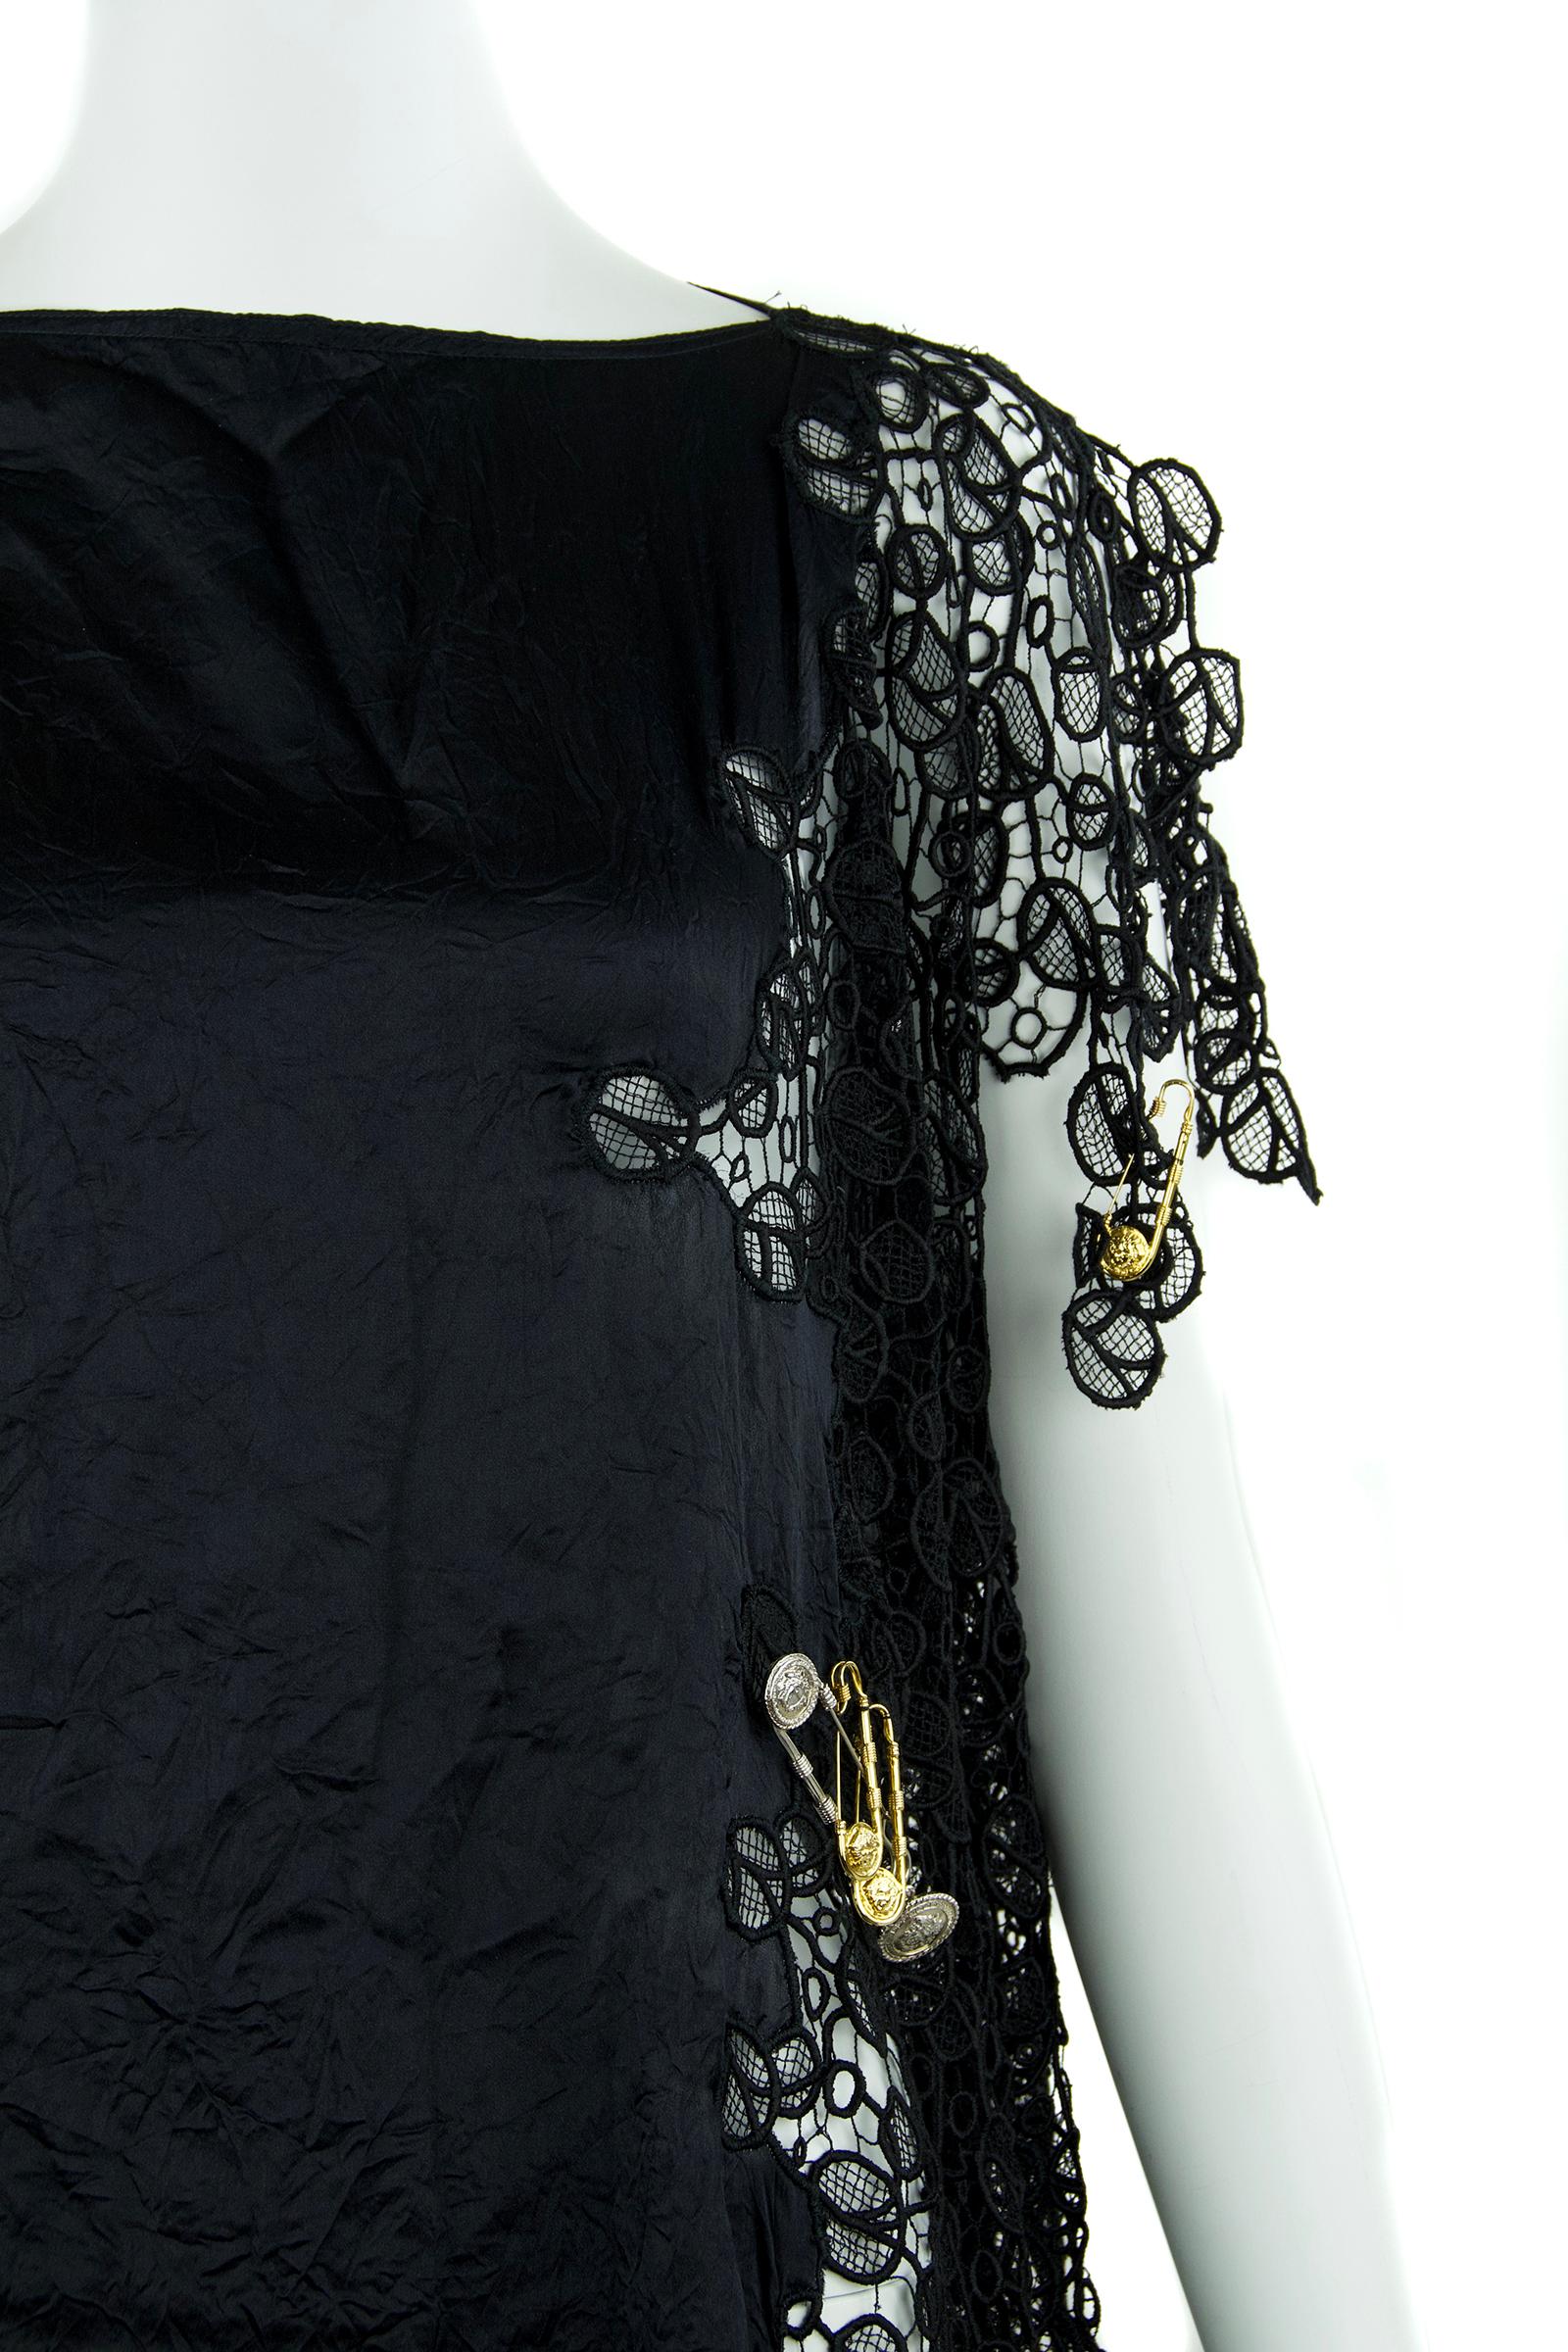 Gianni Versace Vintage Black Silk and Lace Dress with Medusa Safety Pins  For Sale 1